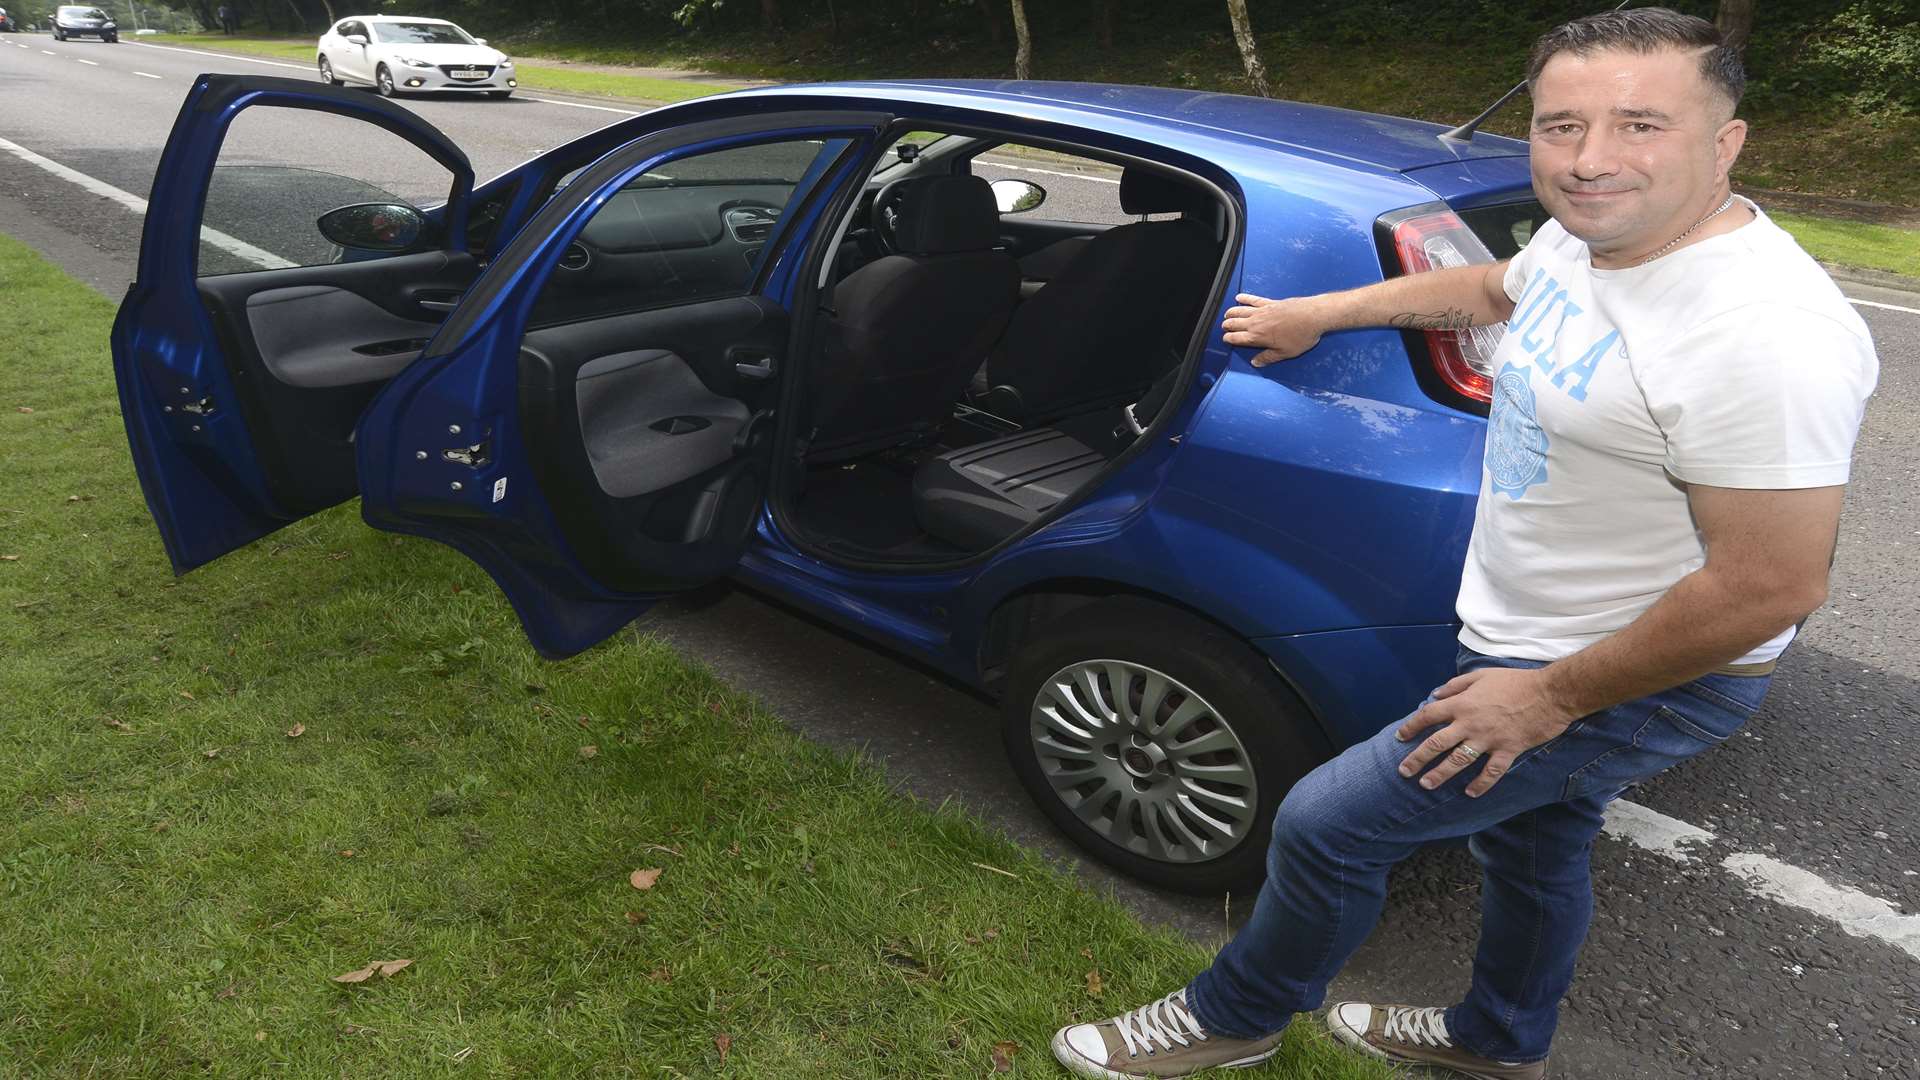 Paulo Berni at the spot where he stopped to deliver his wife's baby in the back seat of their car